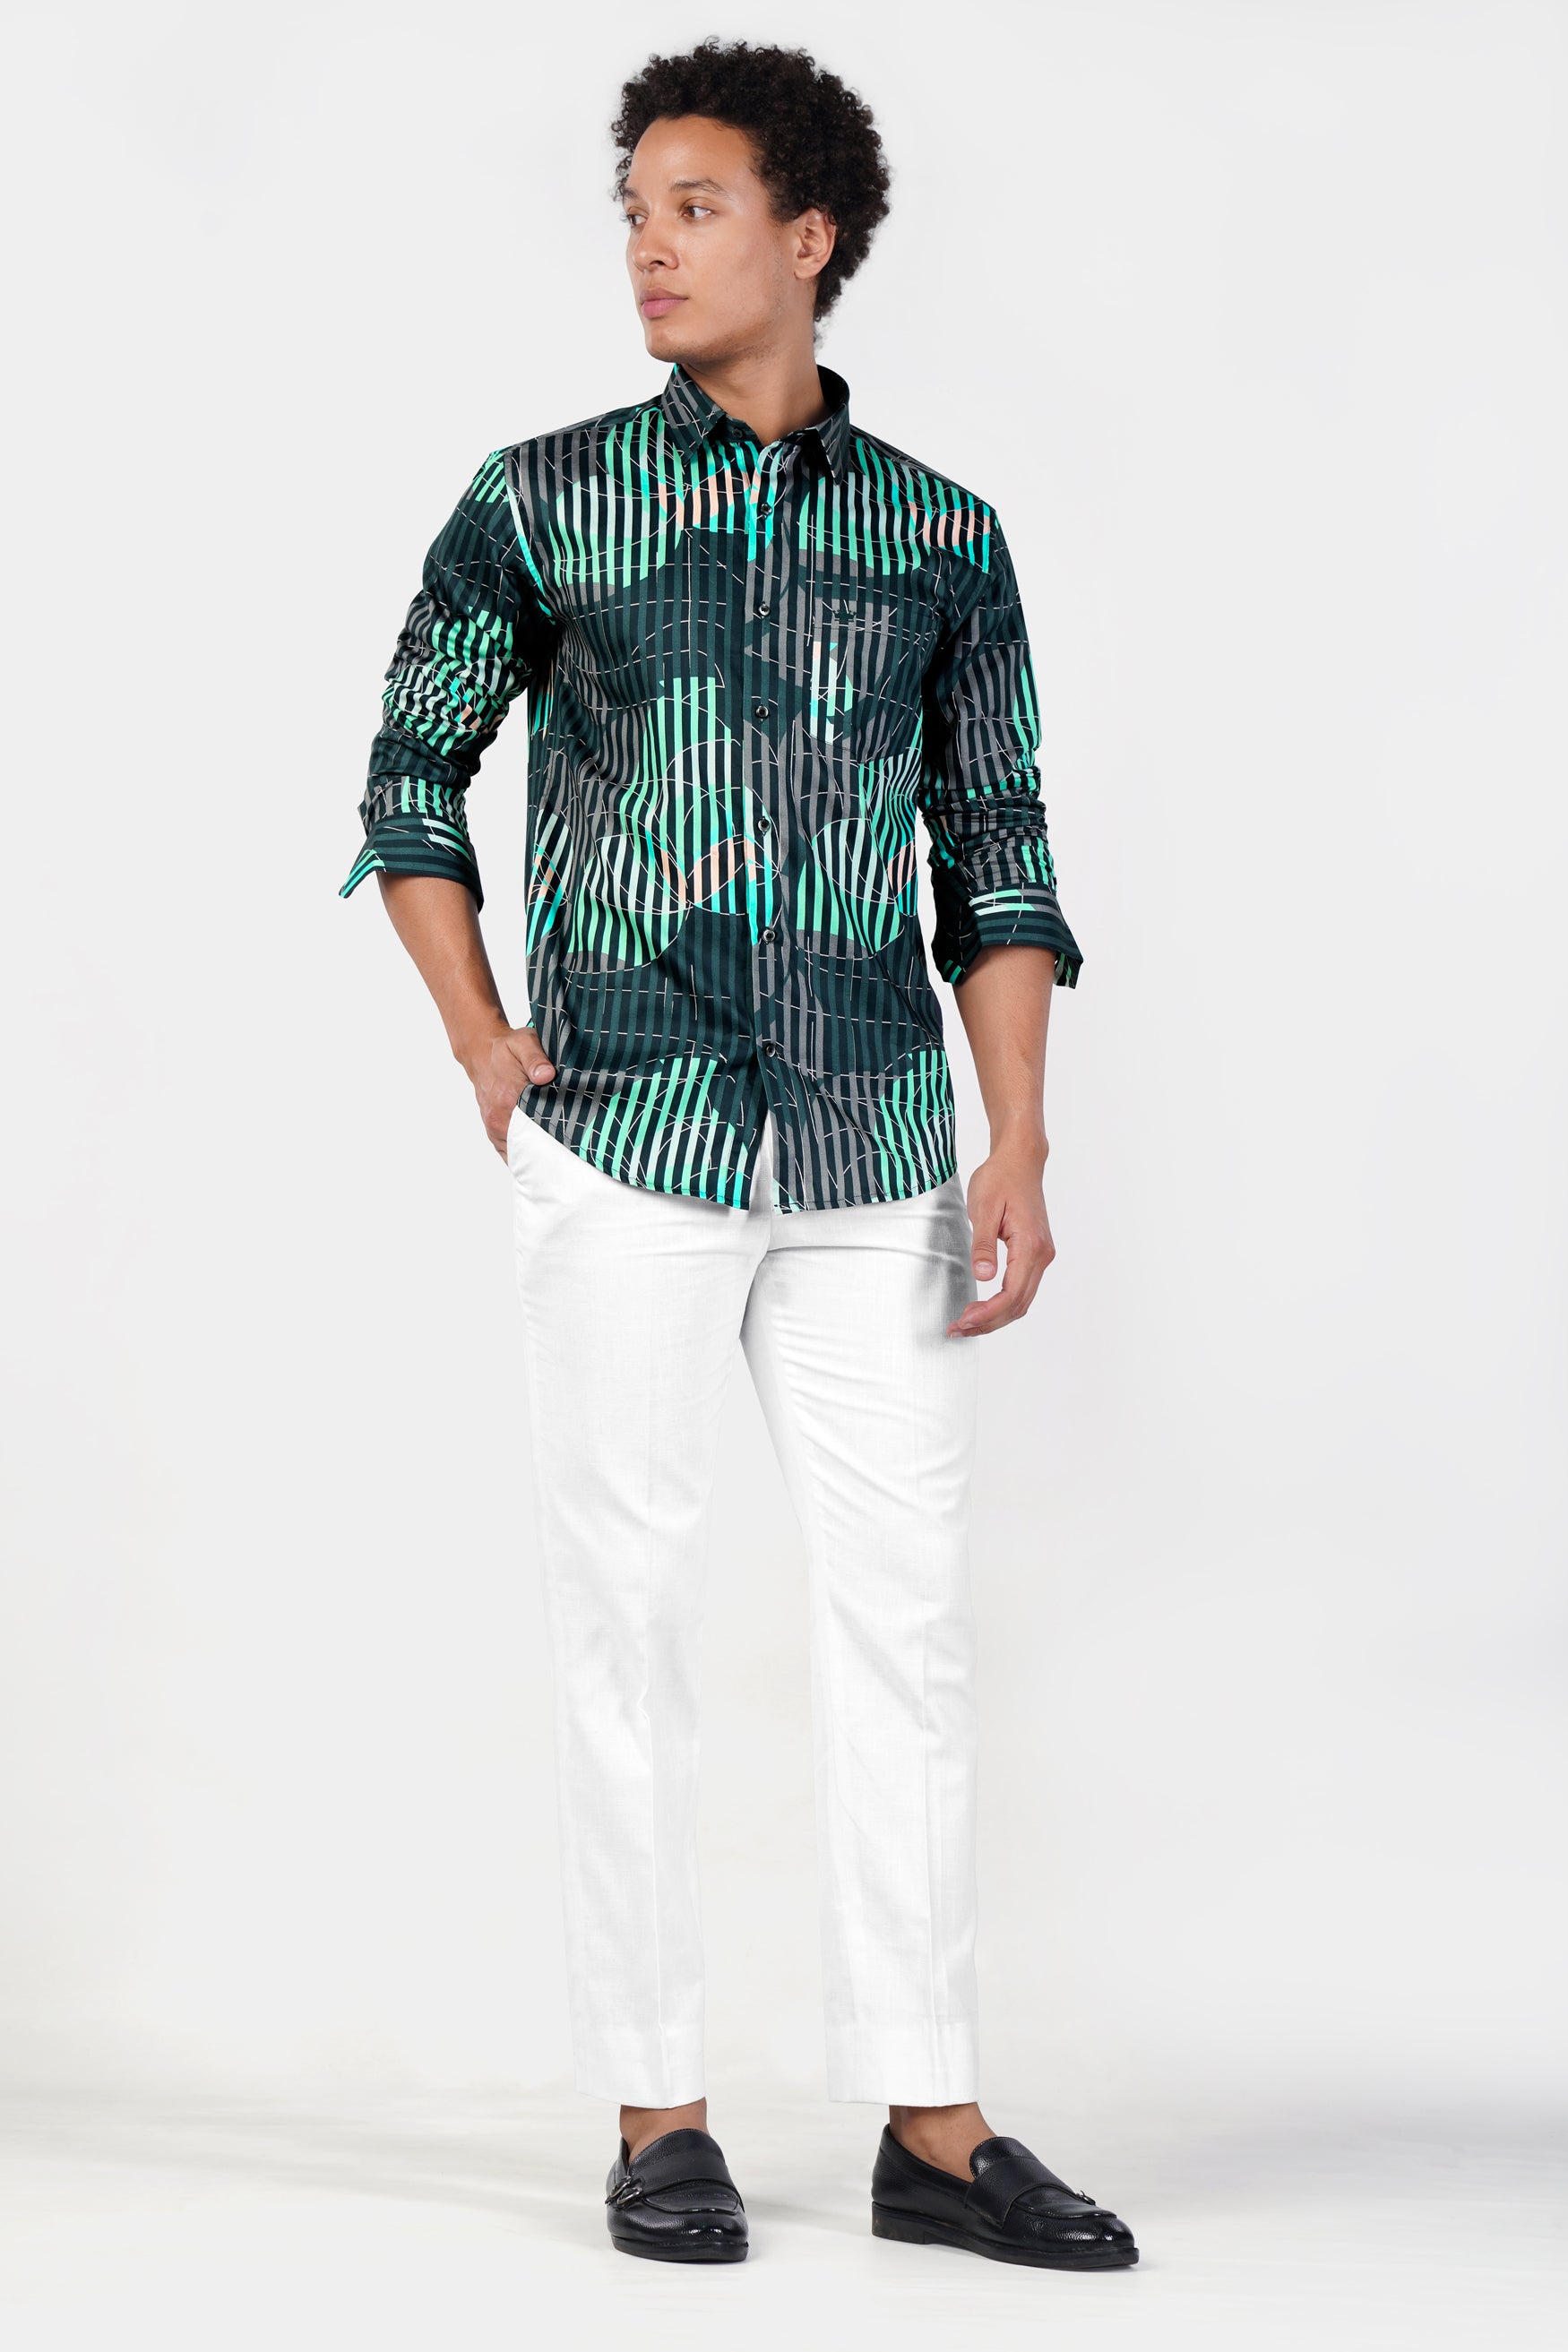 Plantation Green with Almond Beige and Mountain Green Linear Abstract Printed Subtle Sheen Super Soft Premium Cotton Designer Shirt 12043-BLK-38, 12043-BLK-H-38, 12043-BLK-39, 12043-BLK-H-39, 12043-BLK-40, 12043-BLK-H-40, 12043-BLK-42, 12043-BLK-H-42, 12043-BLK-44, 12043-BLK-H-44, 12043-BLK-46, 12043-BLK-H-46, 12043-BLK-48, 12043-BLK-H-48, 12043-BLK-50, 12043-BLK-H-50, 12043-BLK-52, 12043-BLK-H-52